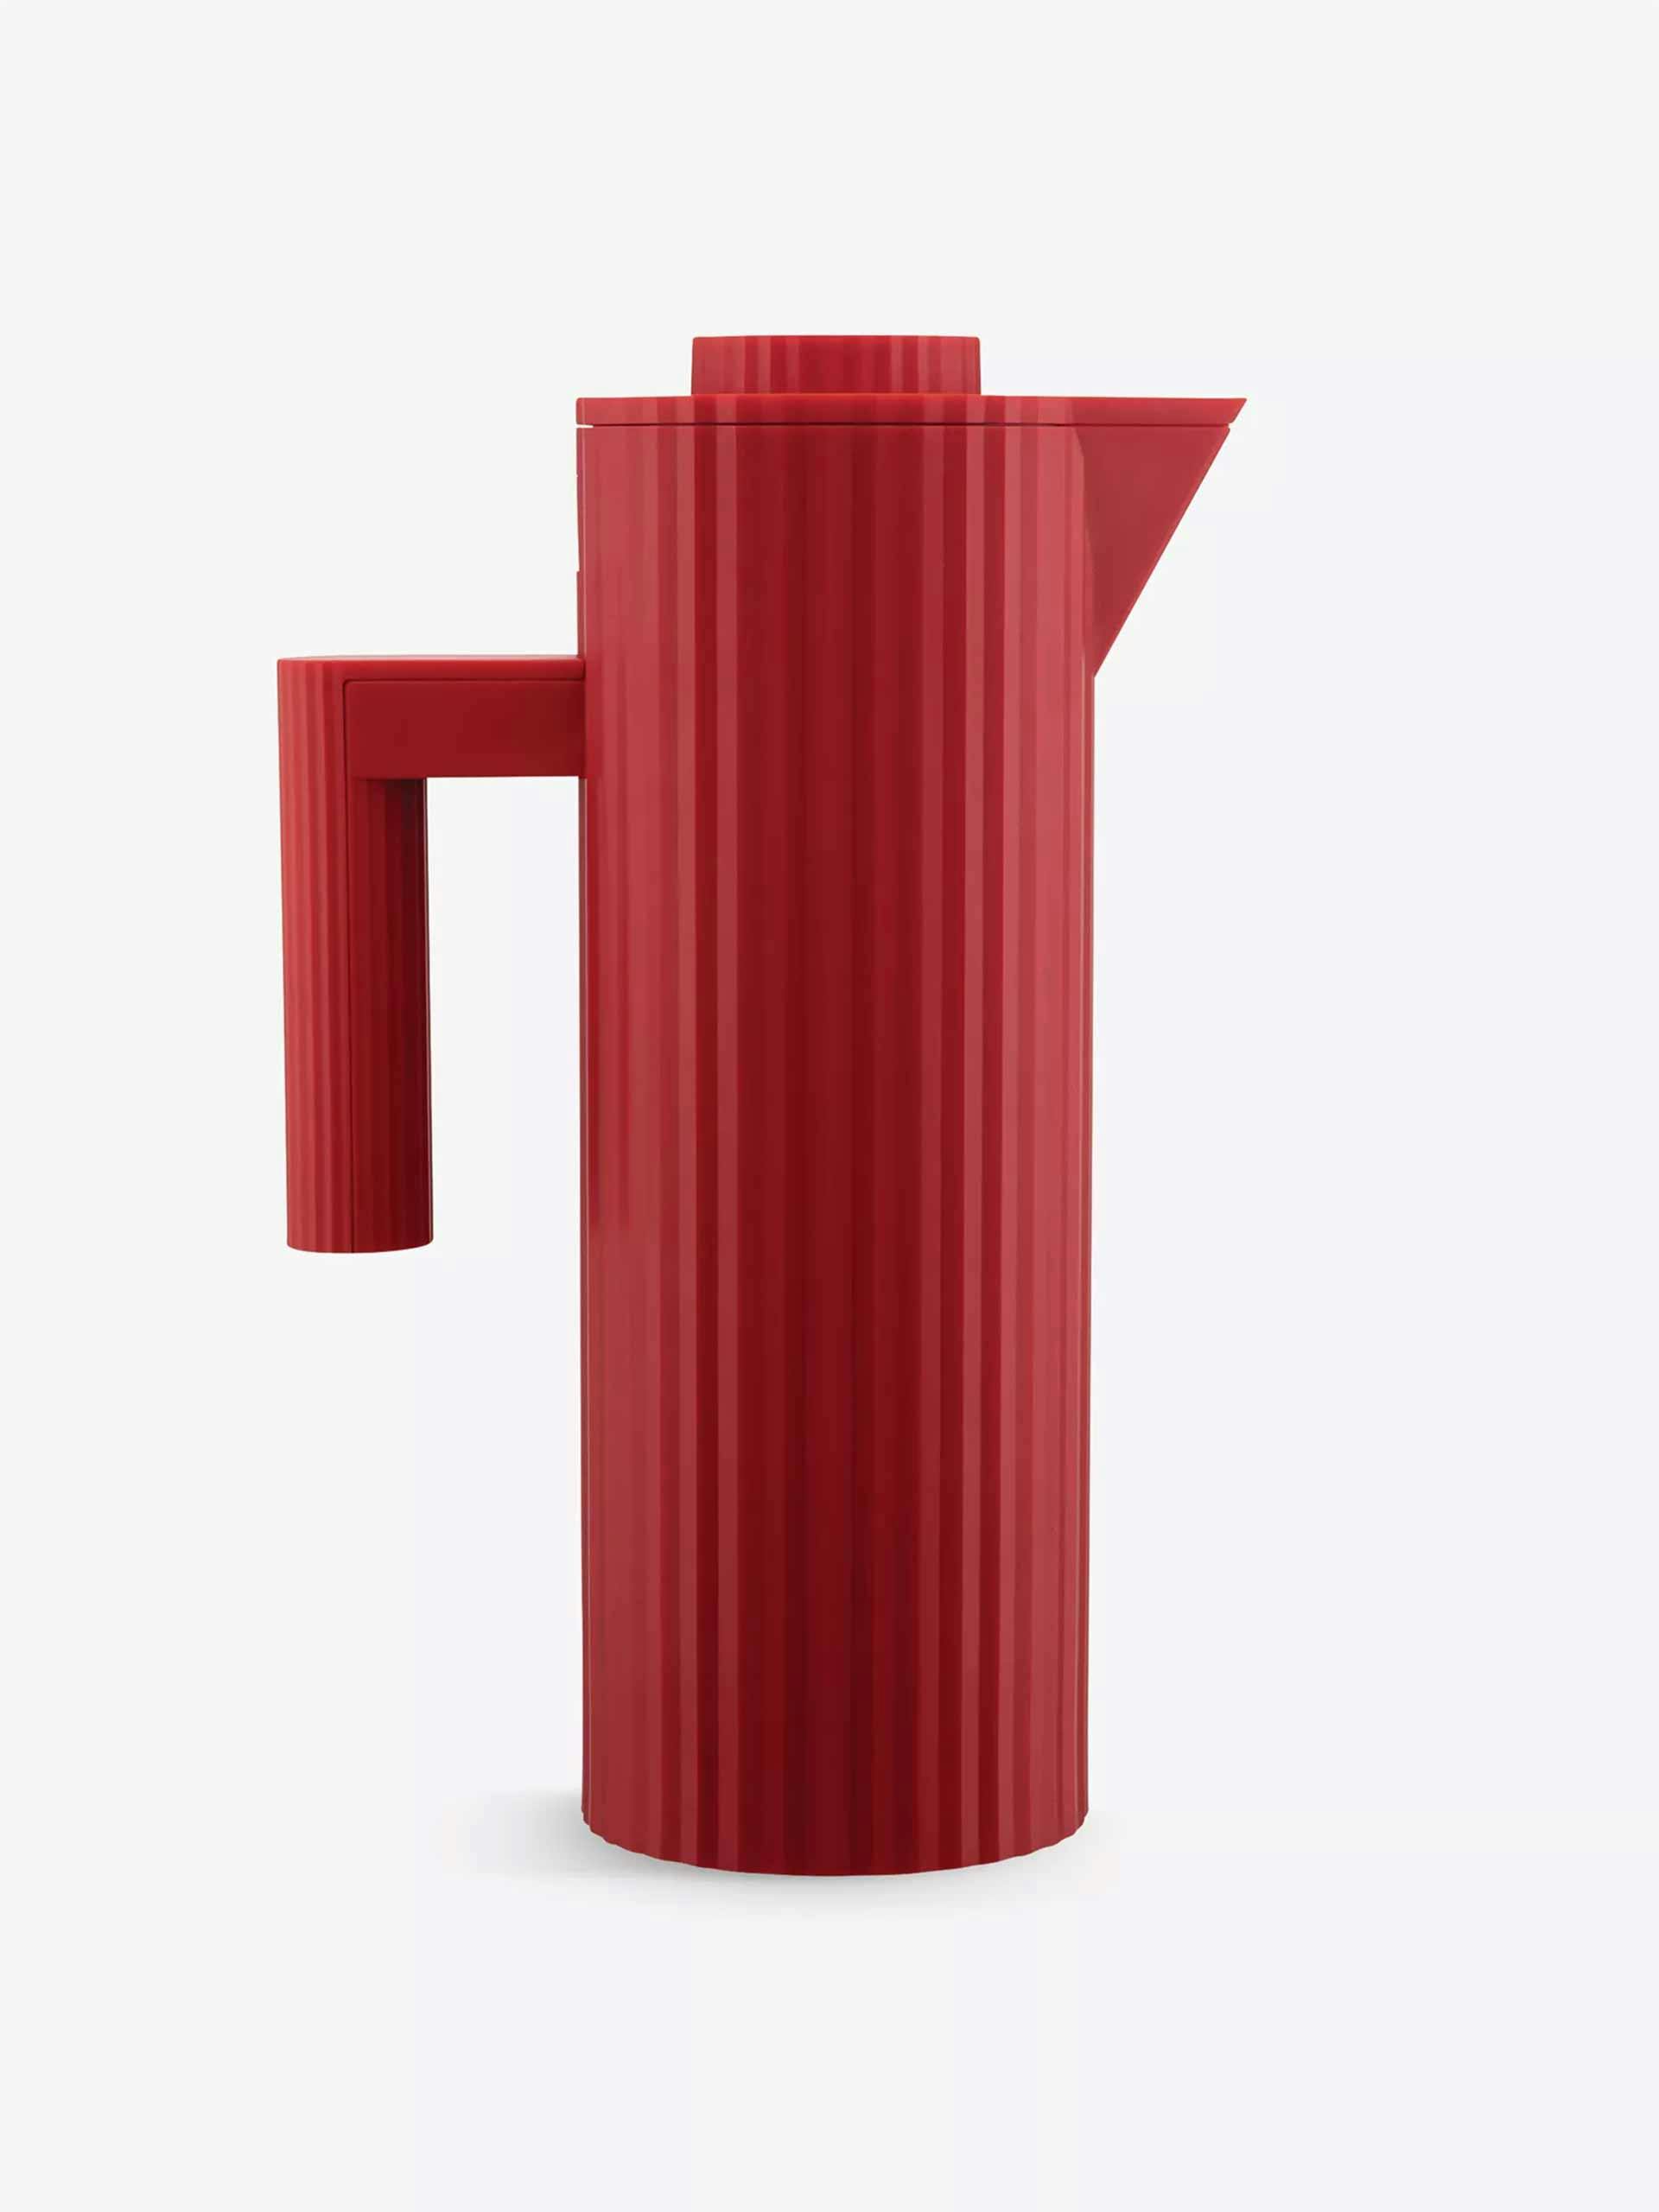 Double-walled thermoplastic-resin and glass jug